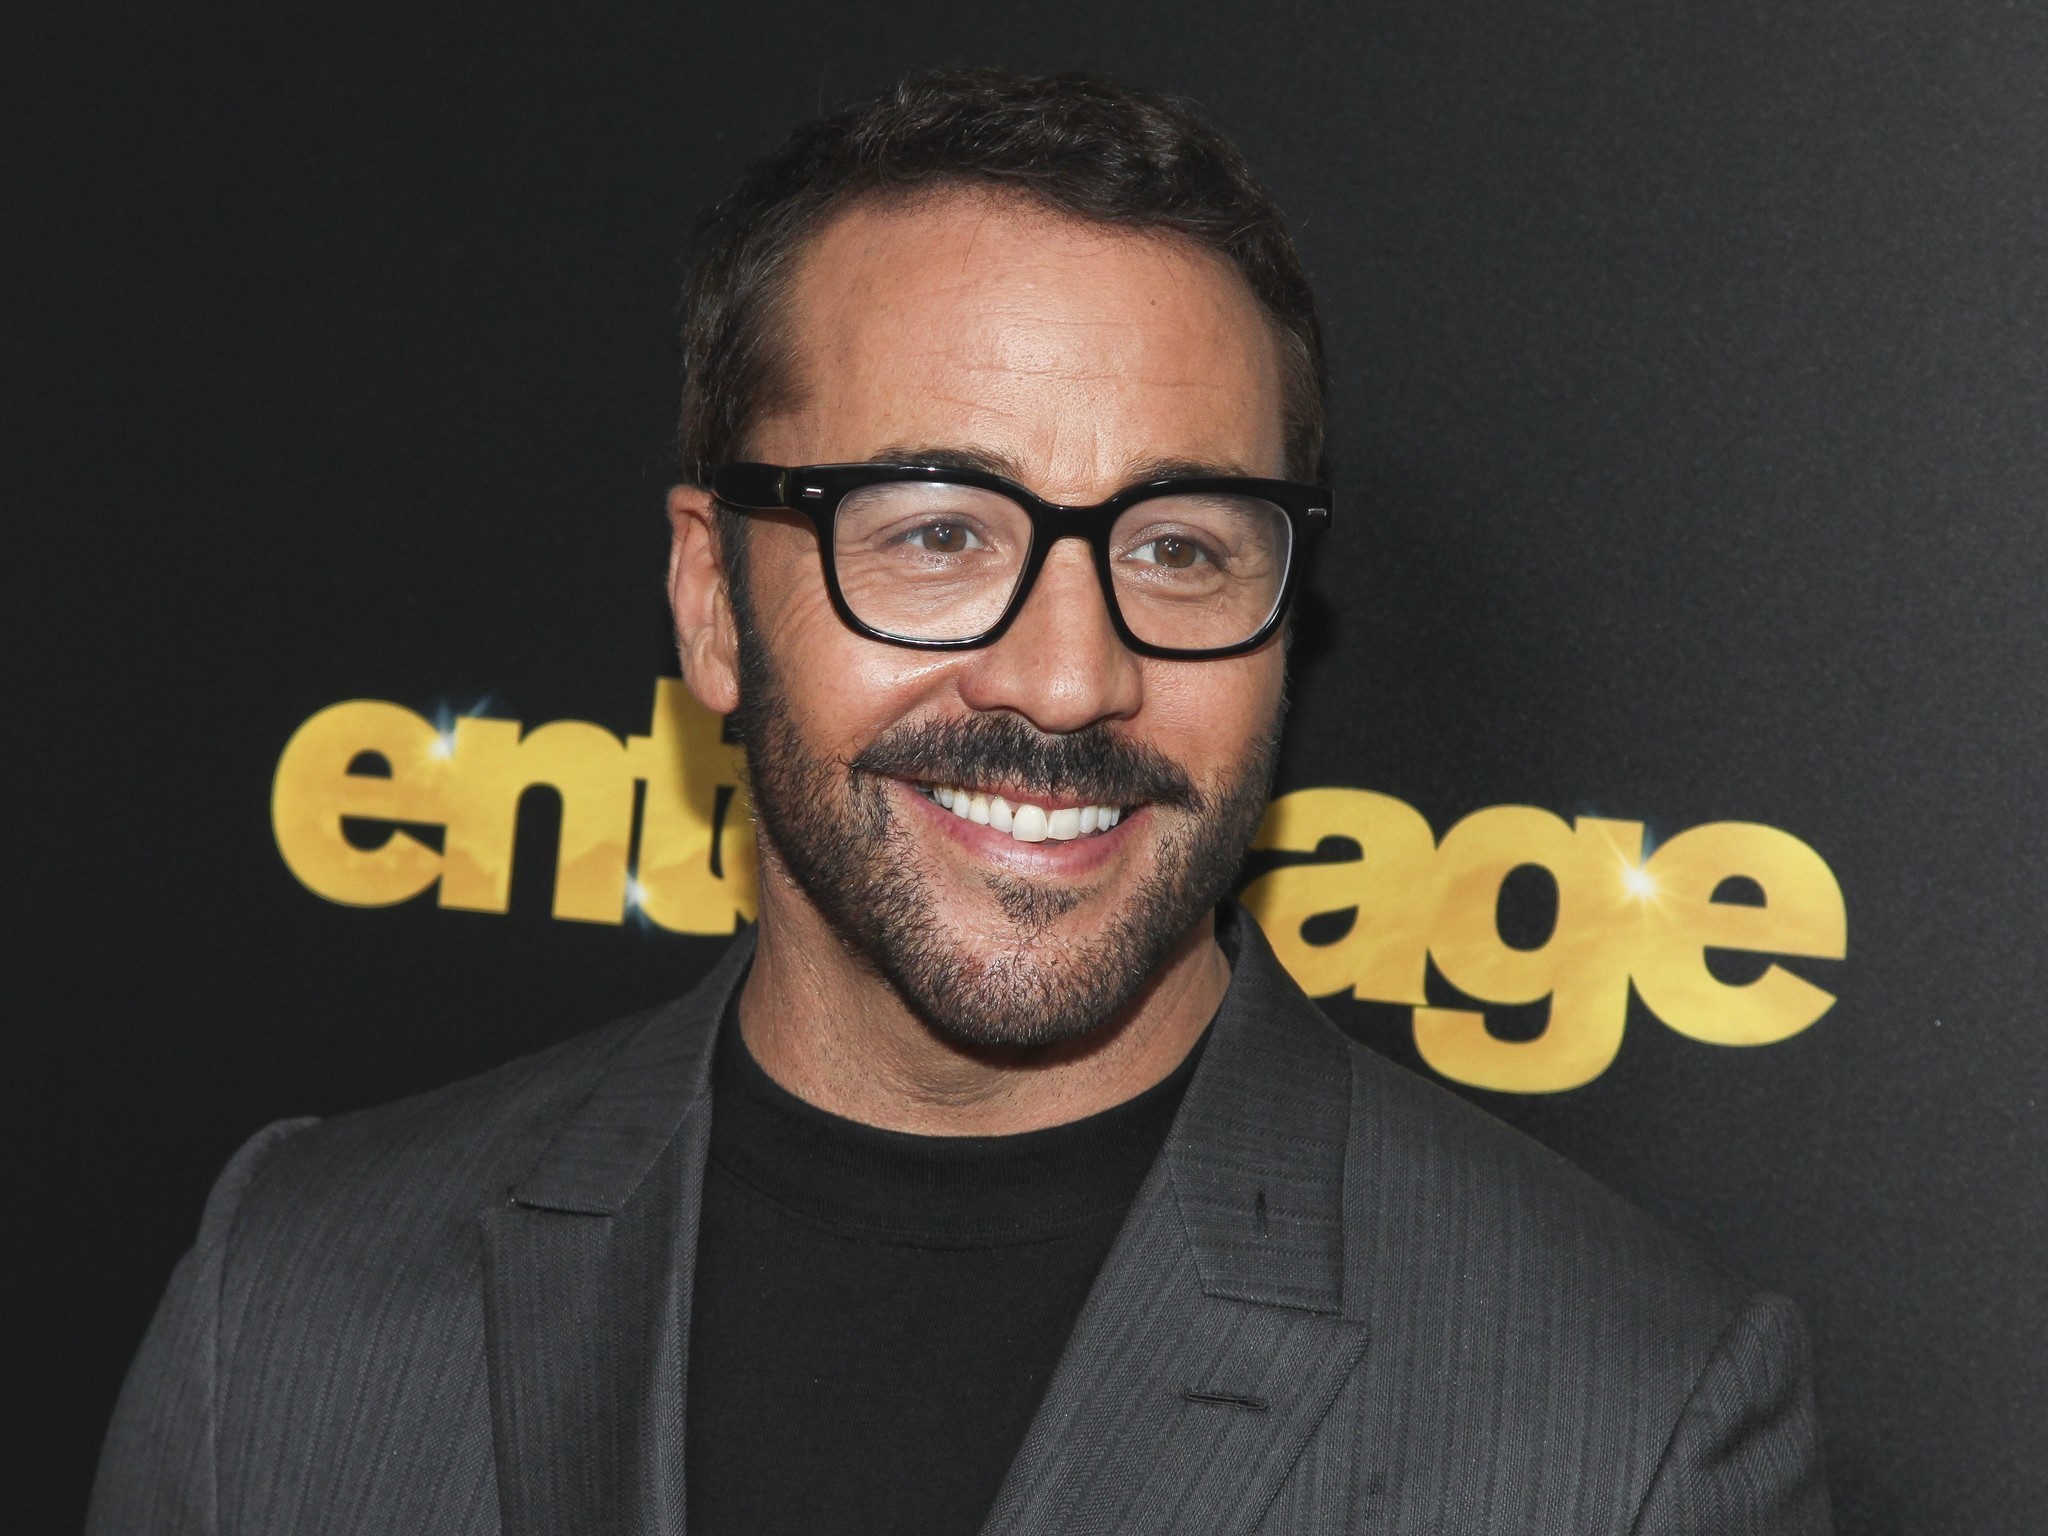 Jeremy Piven set to host discussion with Kevin Spacey at Siskel Center - Chicago Tribune